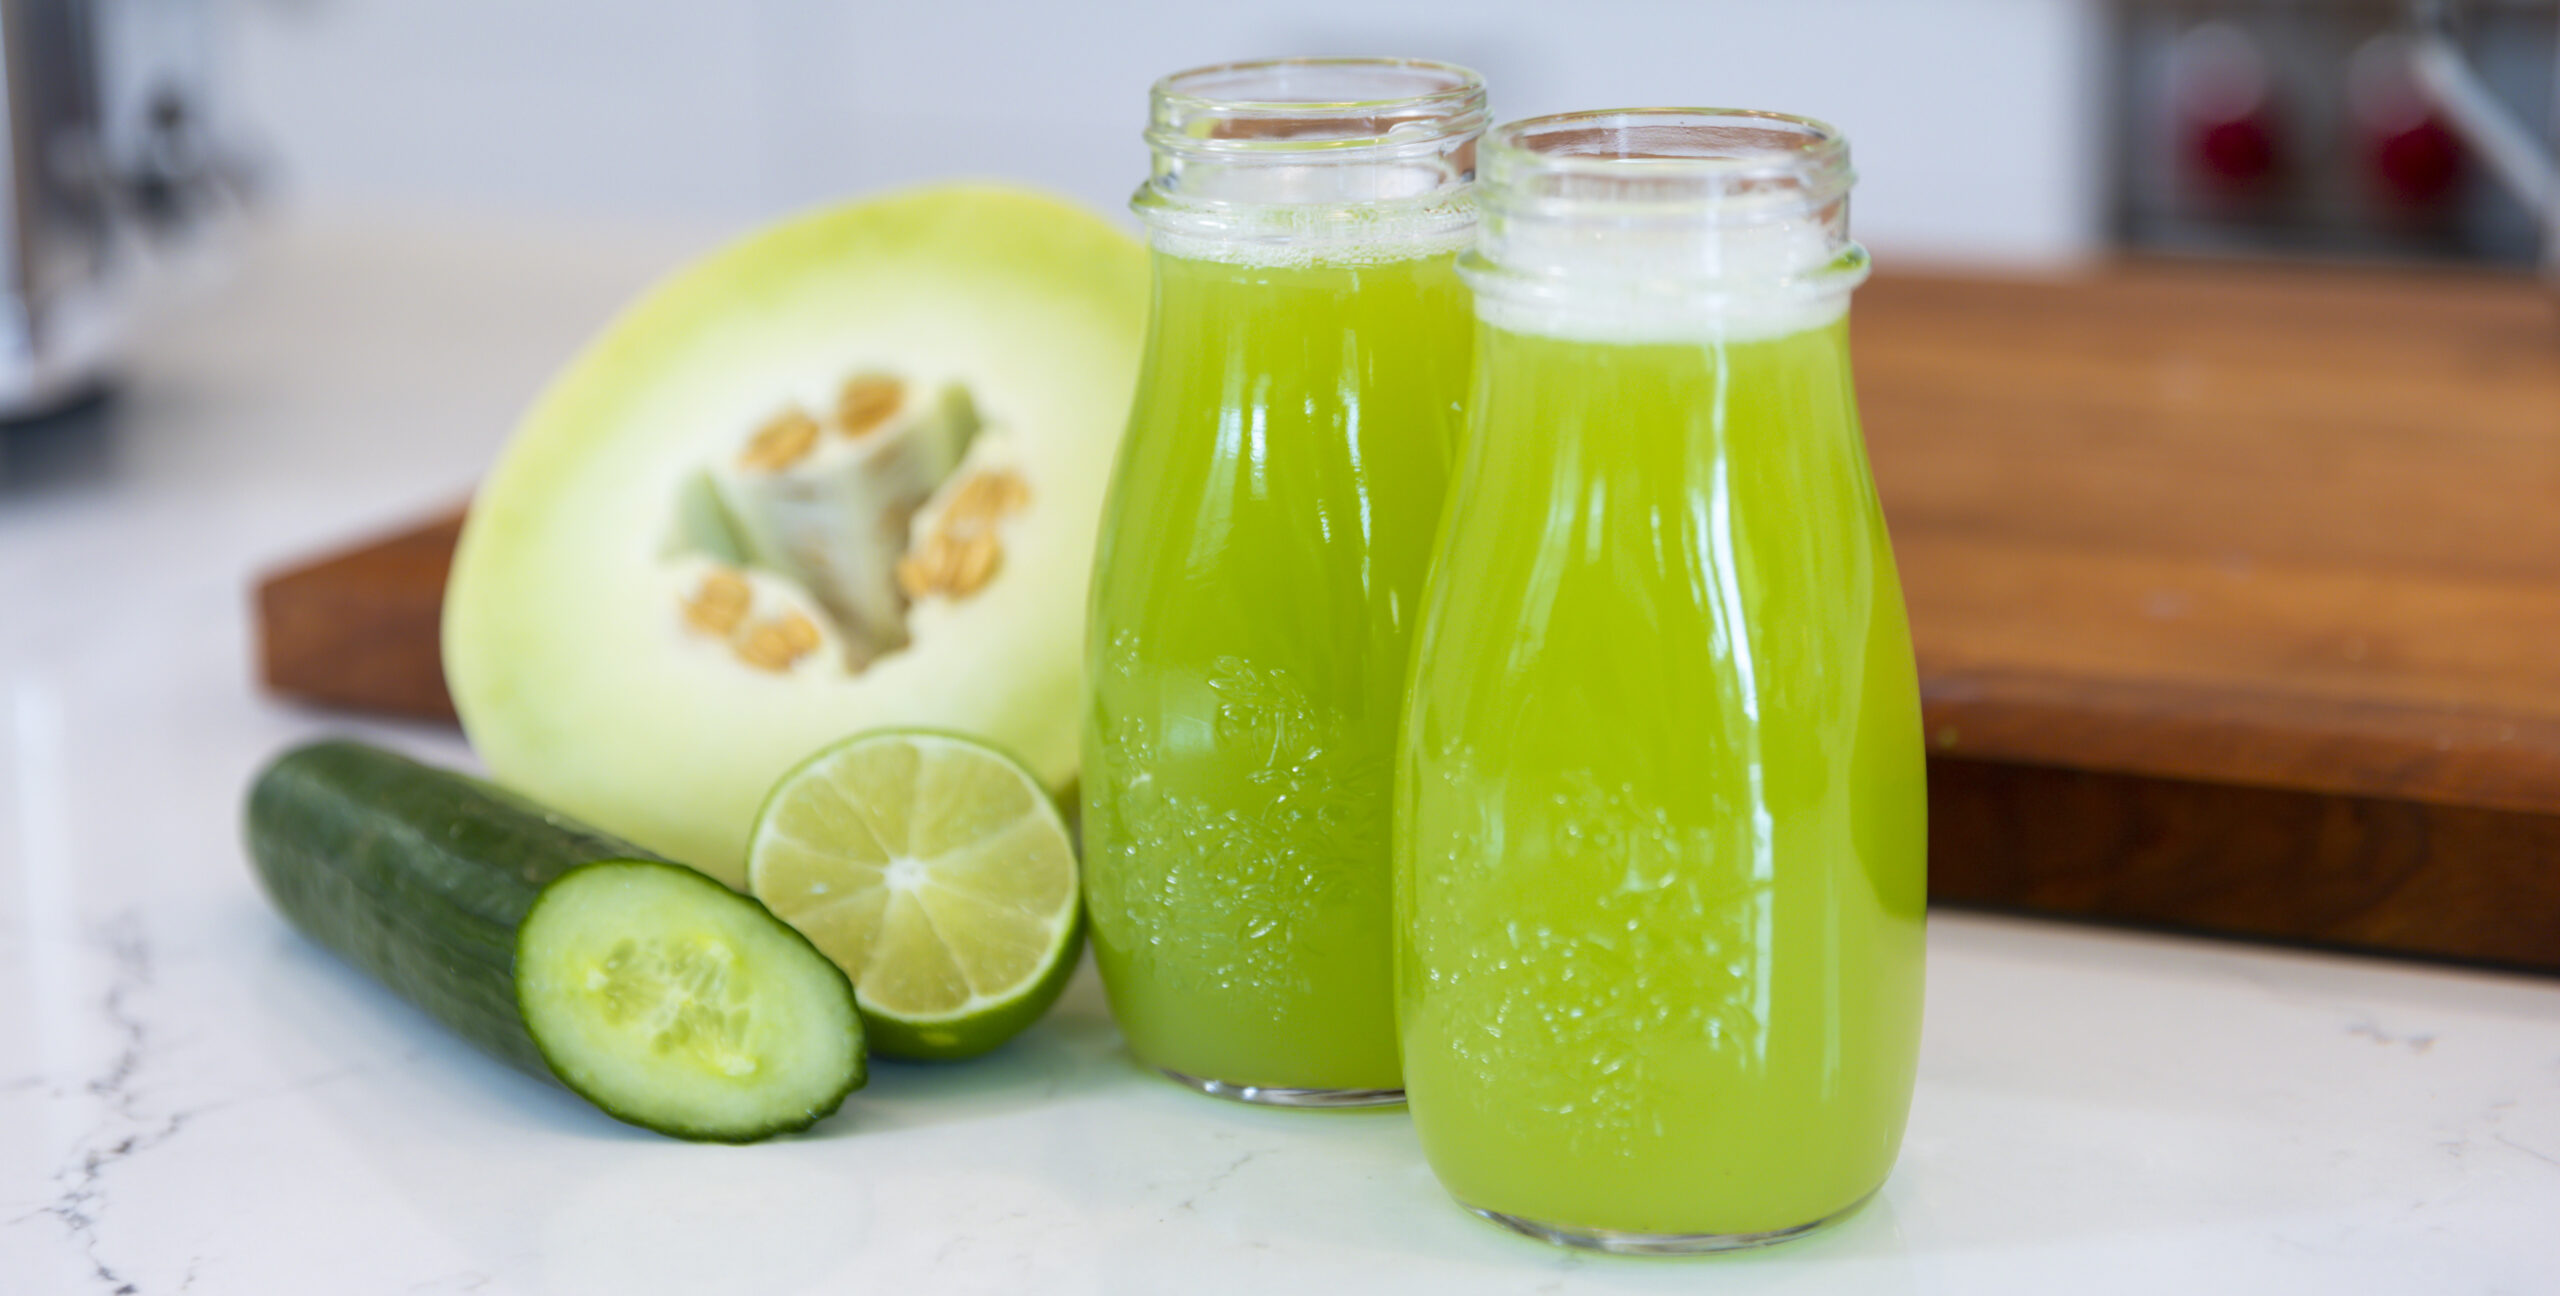 honeydew, cucumber, and lime juice Pure Juicer